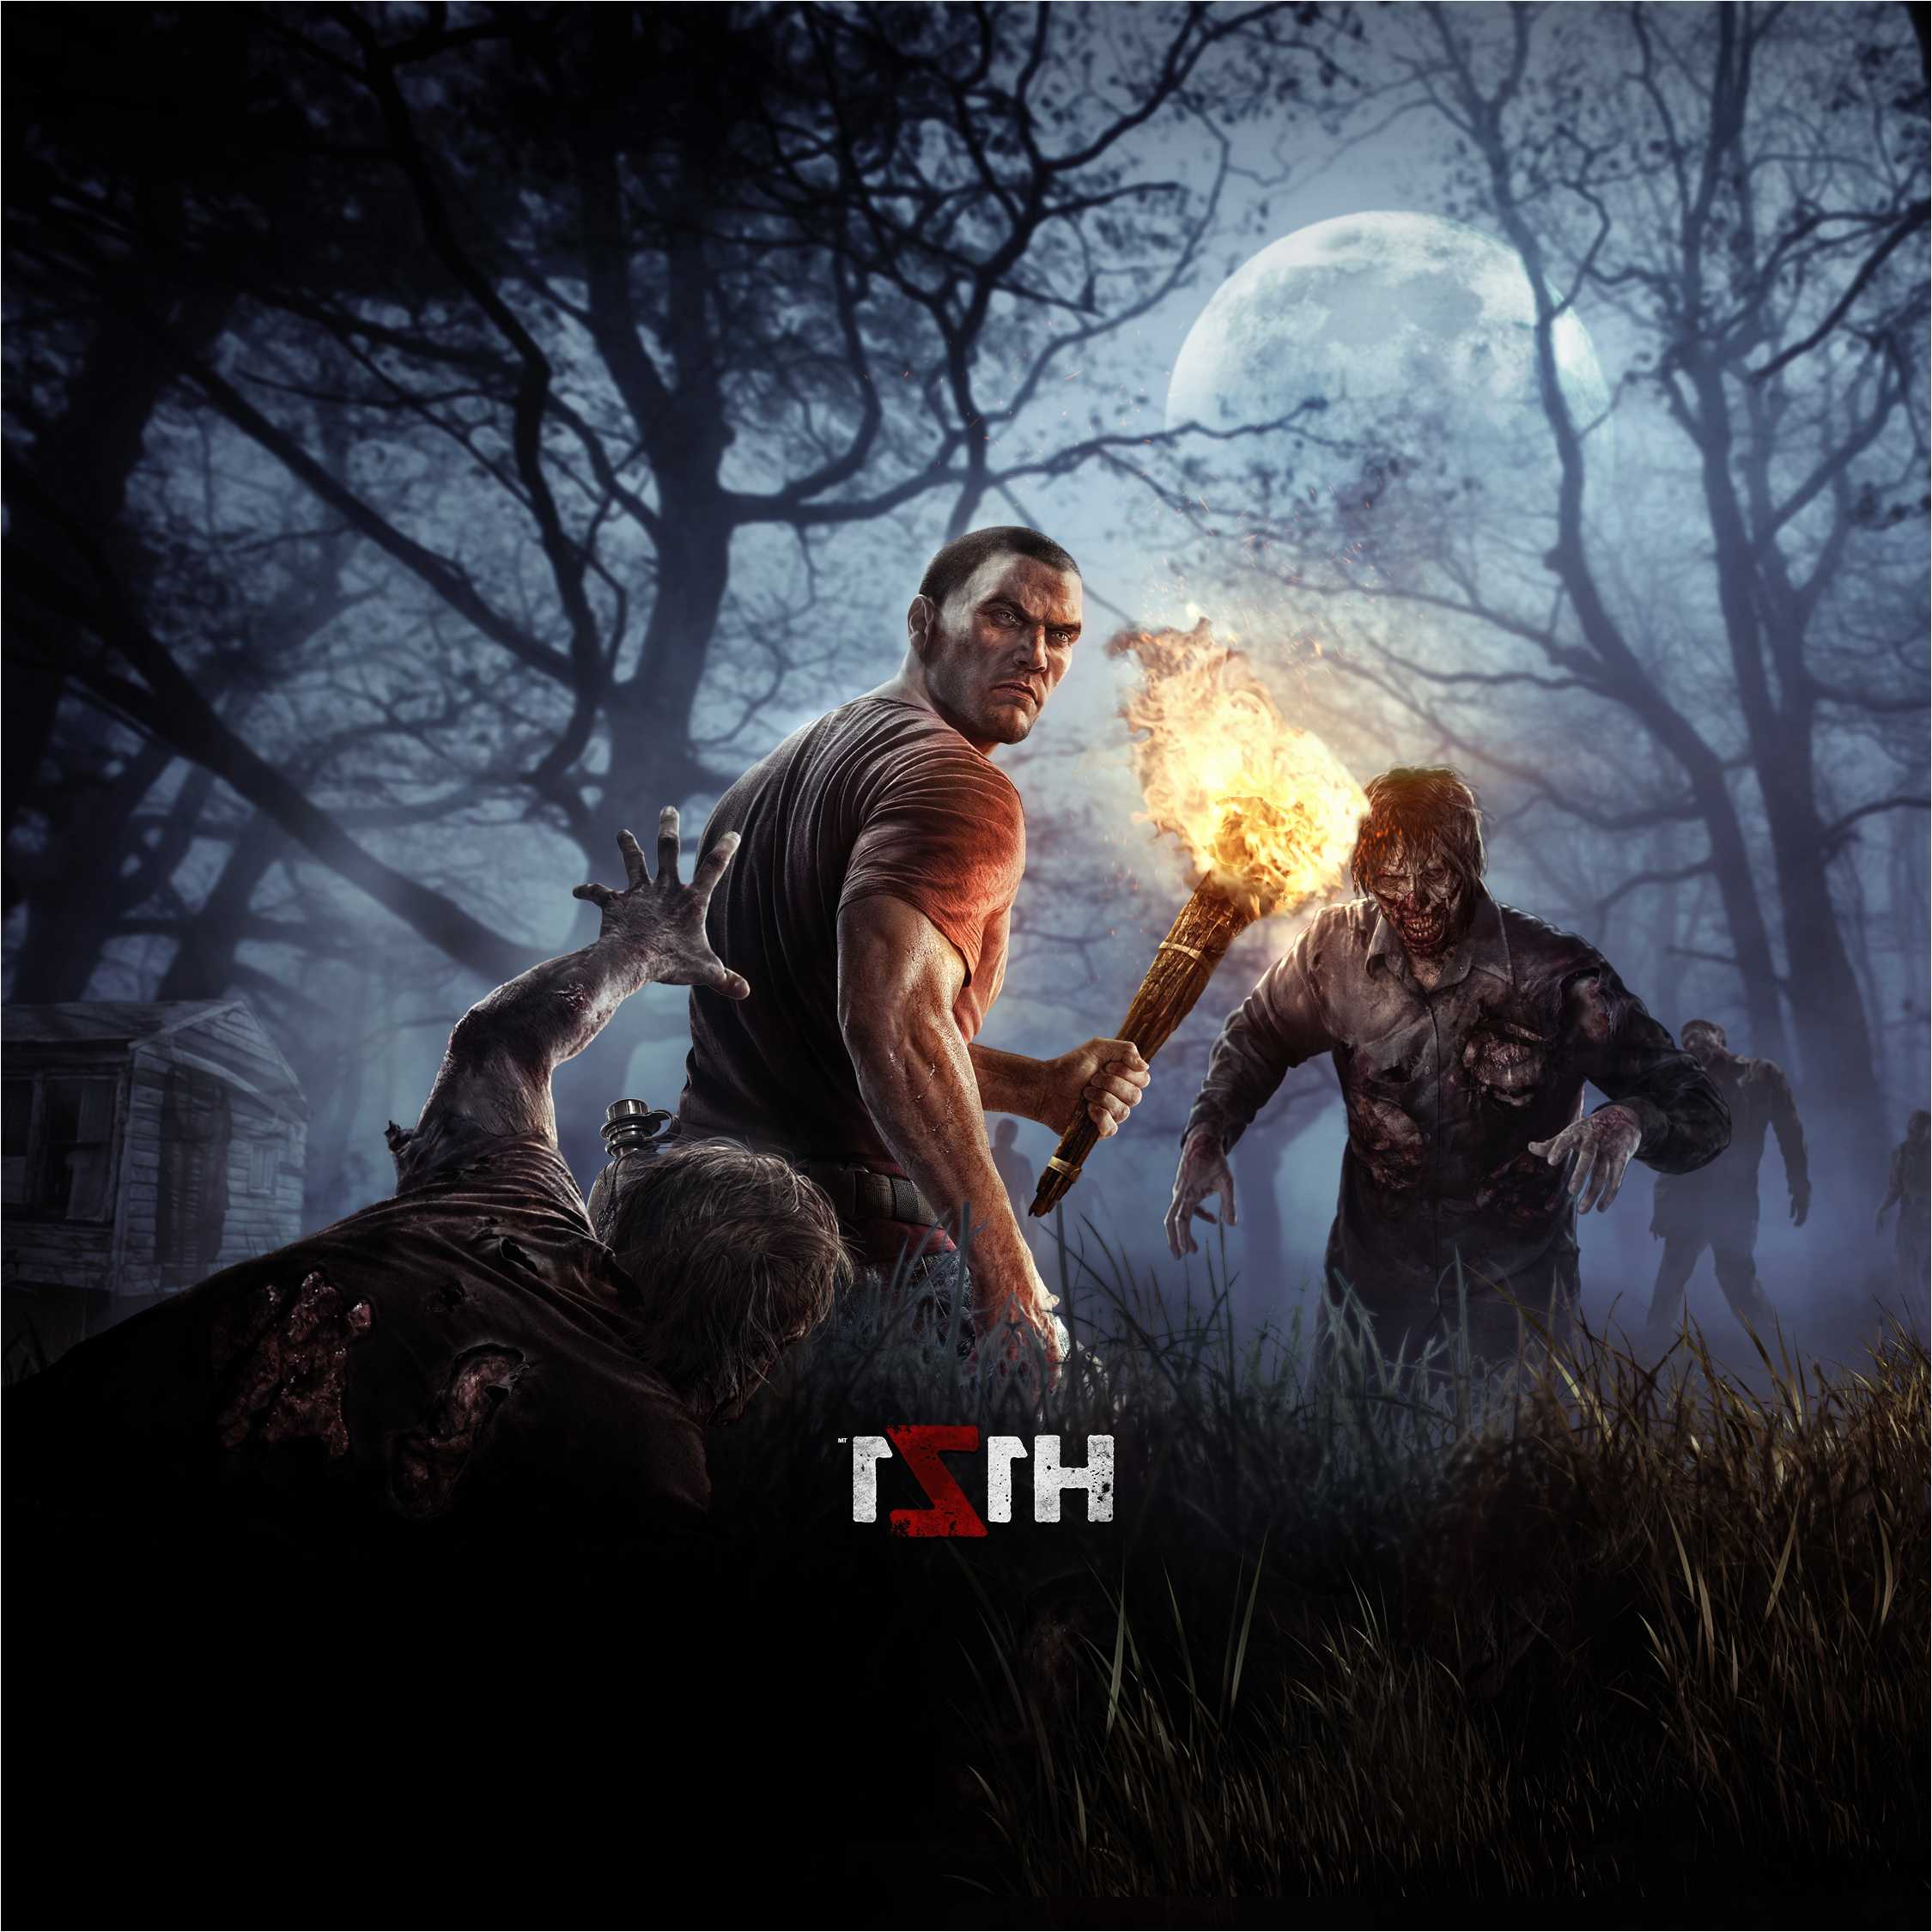 H1z1 Wallpaper, Best H1z1 Image Beautiful Collection